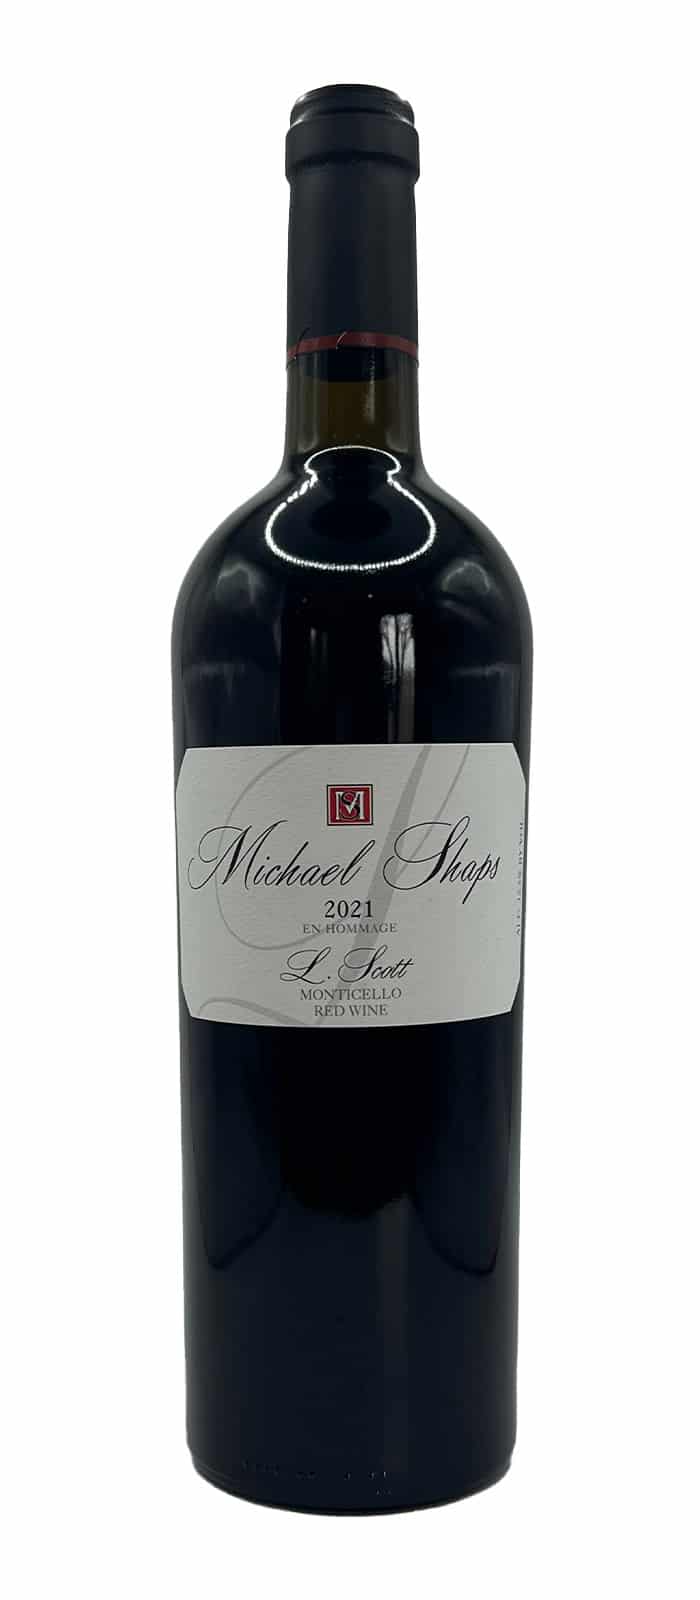 Bottle of Michael Shaps 2021 En Homage L. Scott Monticello Red Wine, Gold Medal, Virginia Governor's Cup Wine Competition.